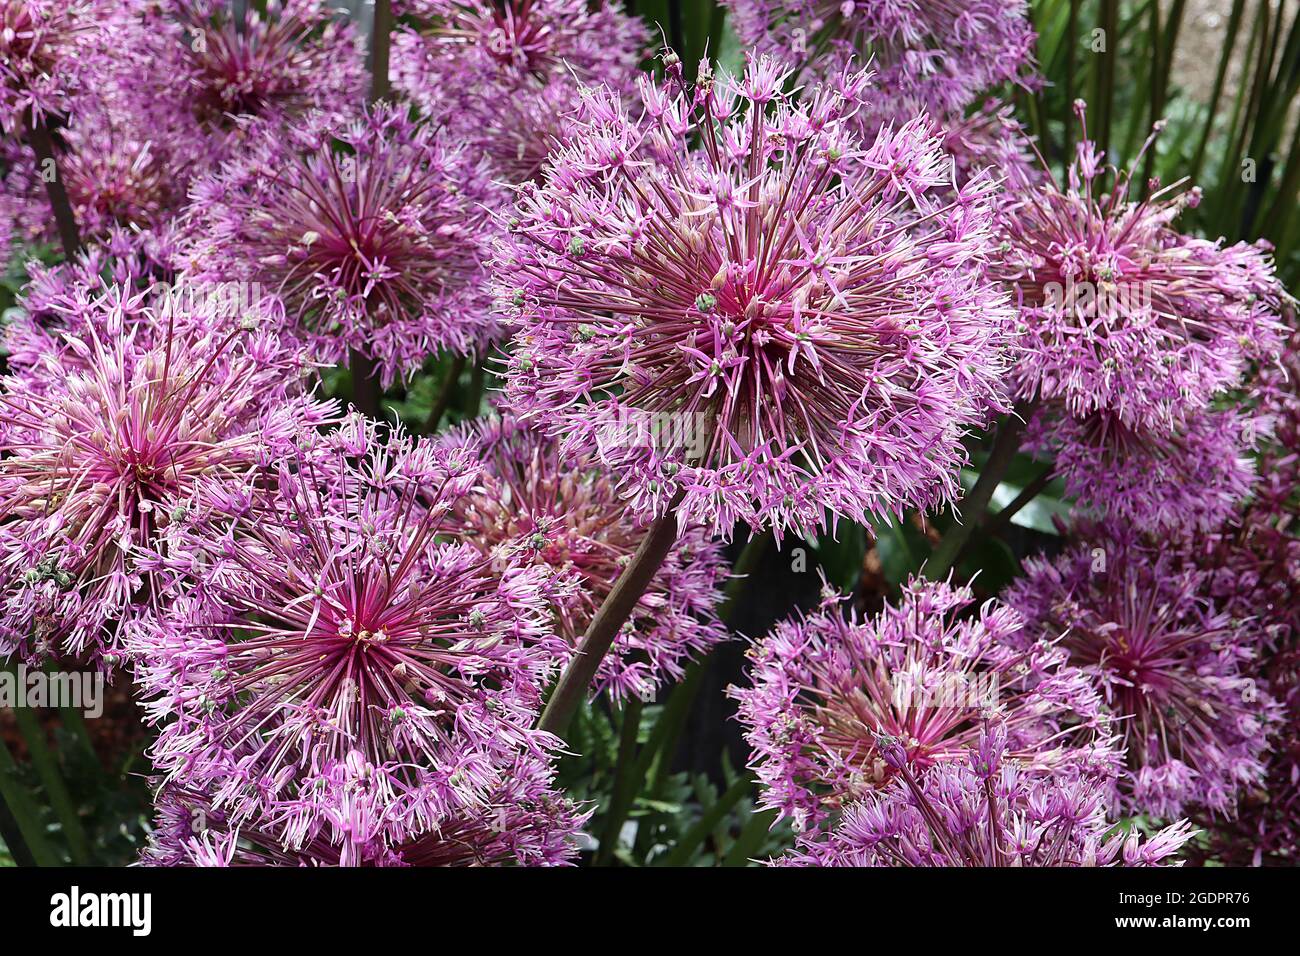 Allium jesdianum ‘Early Emperor’ spherical umbels of star-shaped violet flowers on tall stems,  July, England, UK Stock Photo